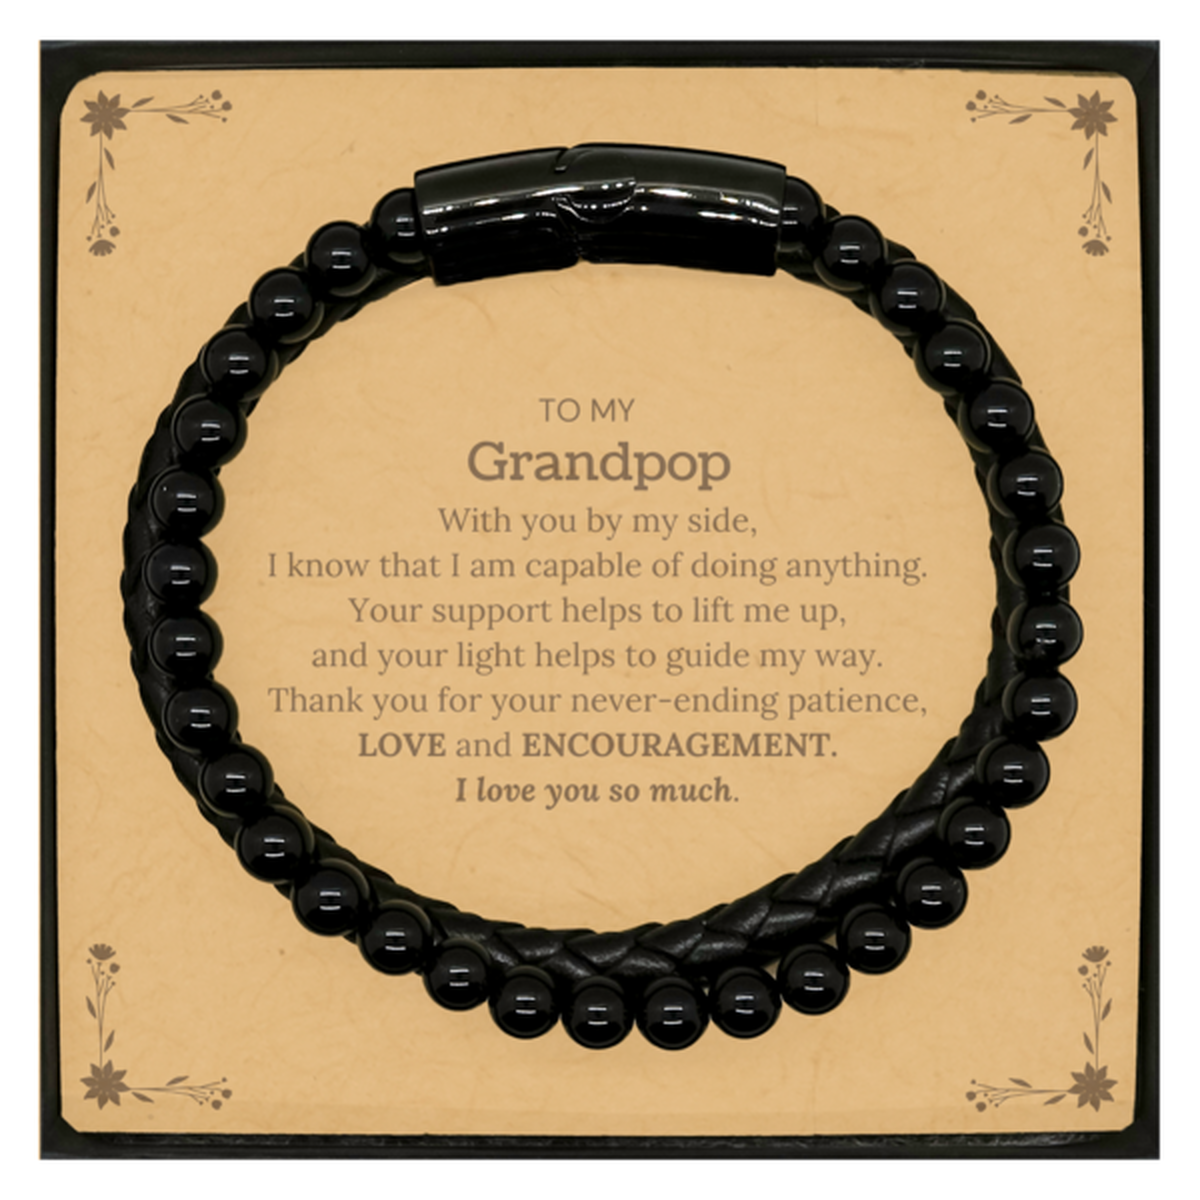 Appreciation Grandpop Stone Leather Bracelets Gifts, To My Grandpop Birthday Christmas Wedding Keepsake Gifts for Grandpop With you by my side, I know that I am capable of doing anything. I love you so much